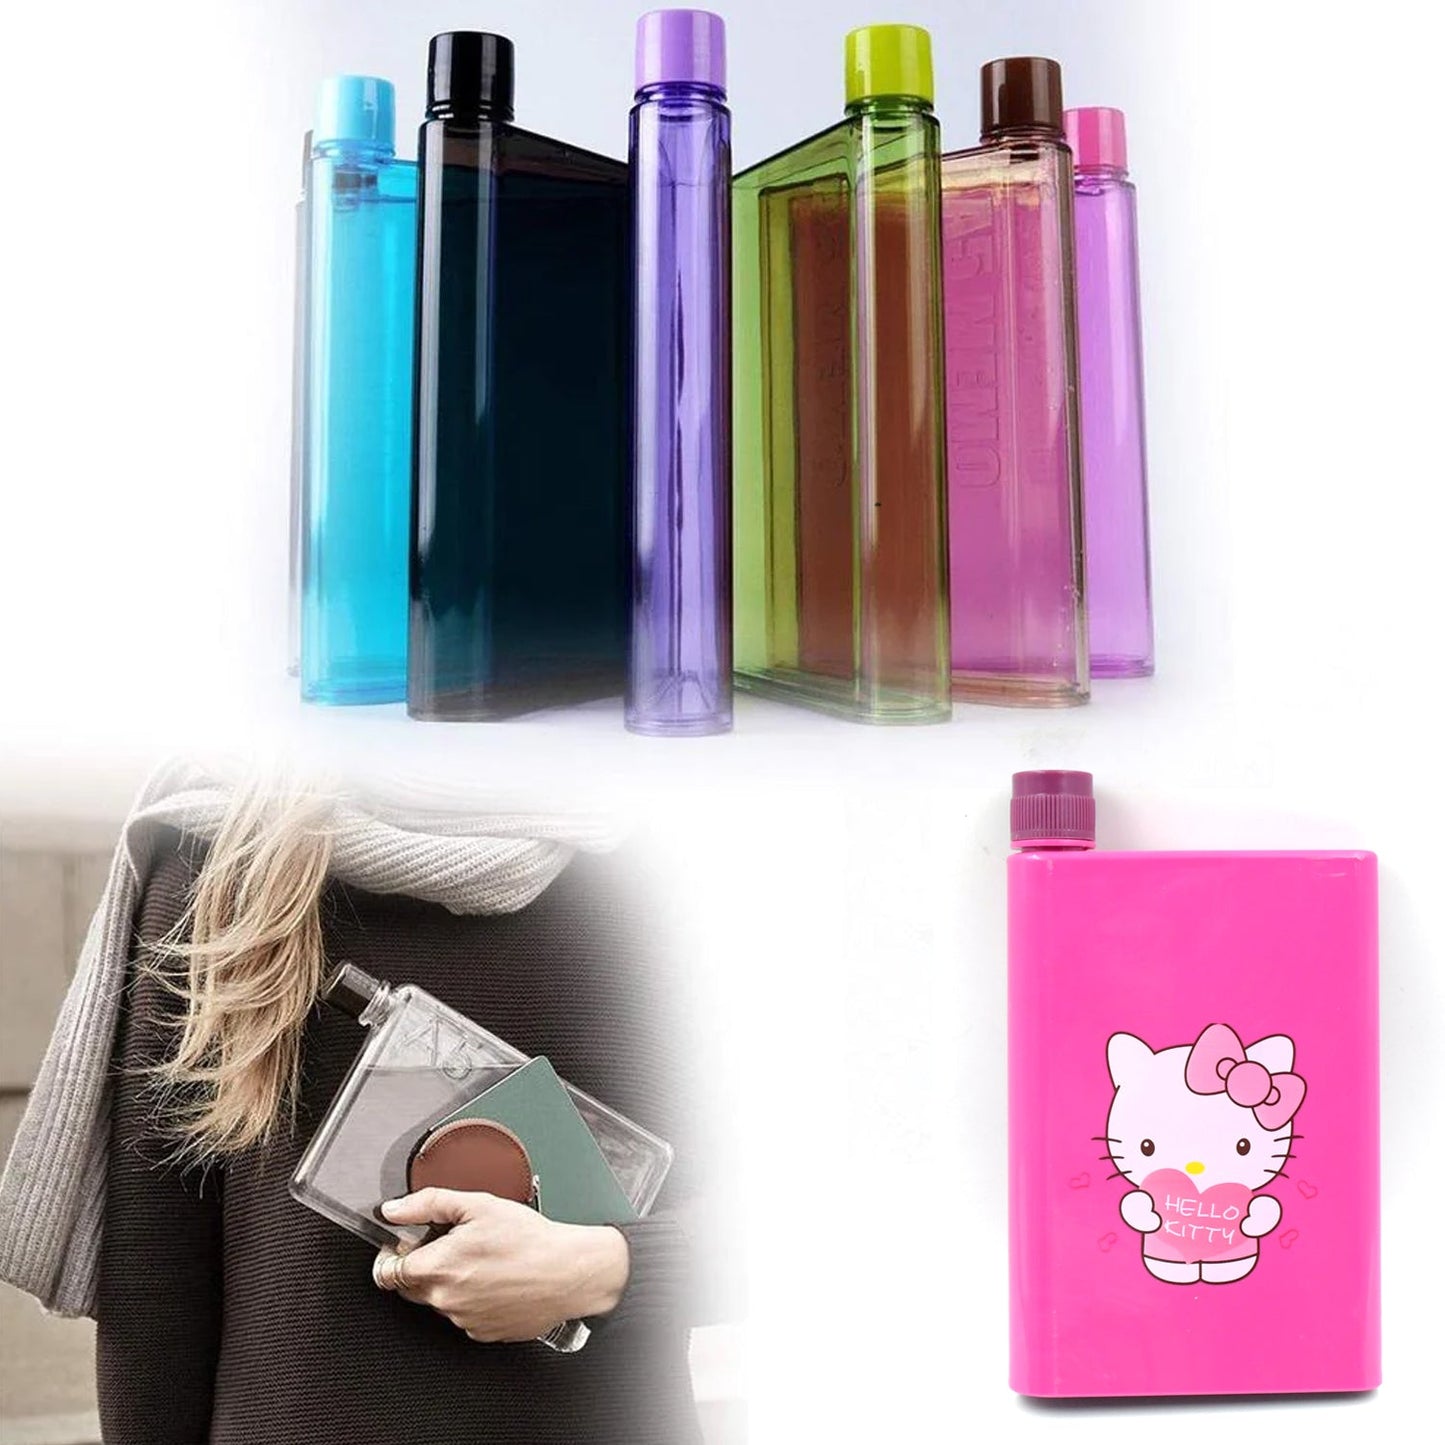 0147 Kitchen Storage A5 size Flat Portable NoteBook Shape Water Bottle With a Cartoon Character Design-Hello Kitty - For School Outdoors and Sports Return Gift/Birthday Gift (1 Pc 420ML)